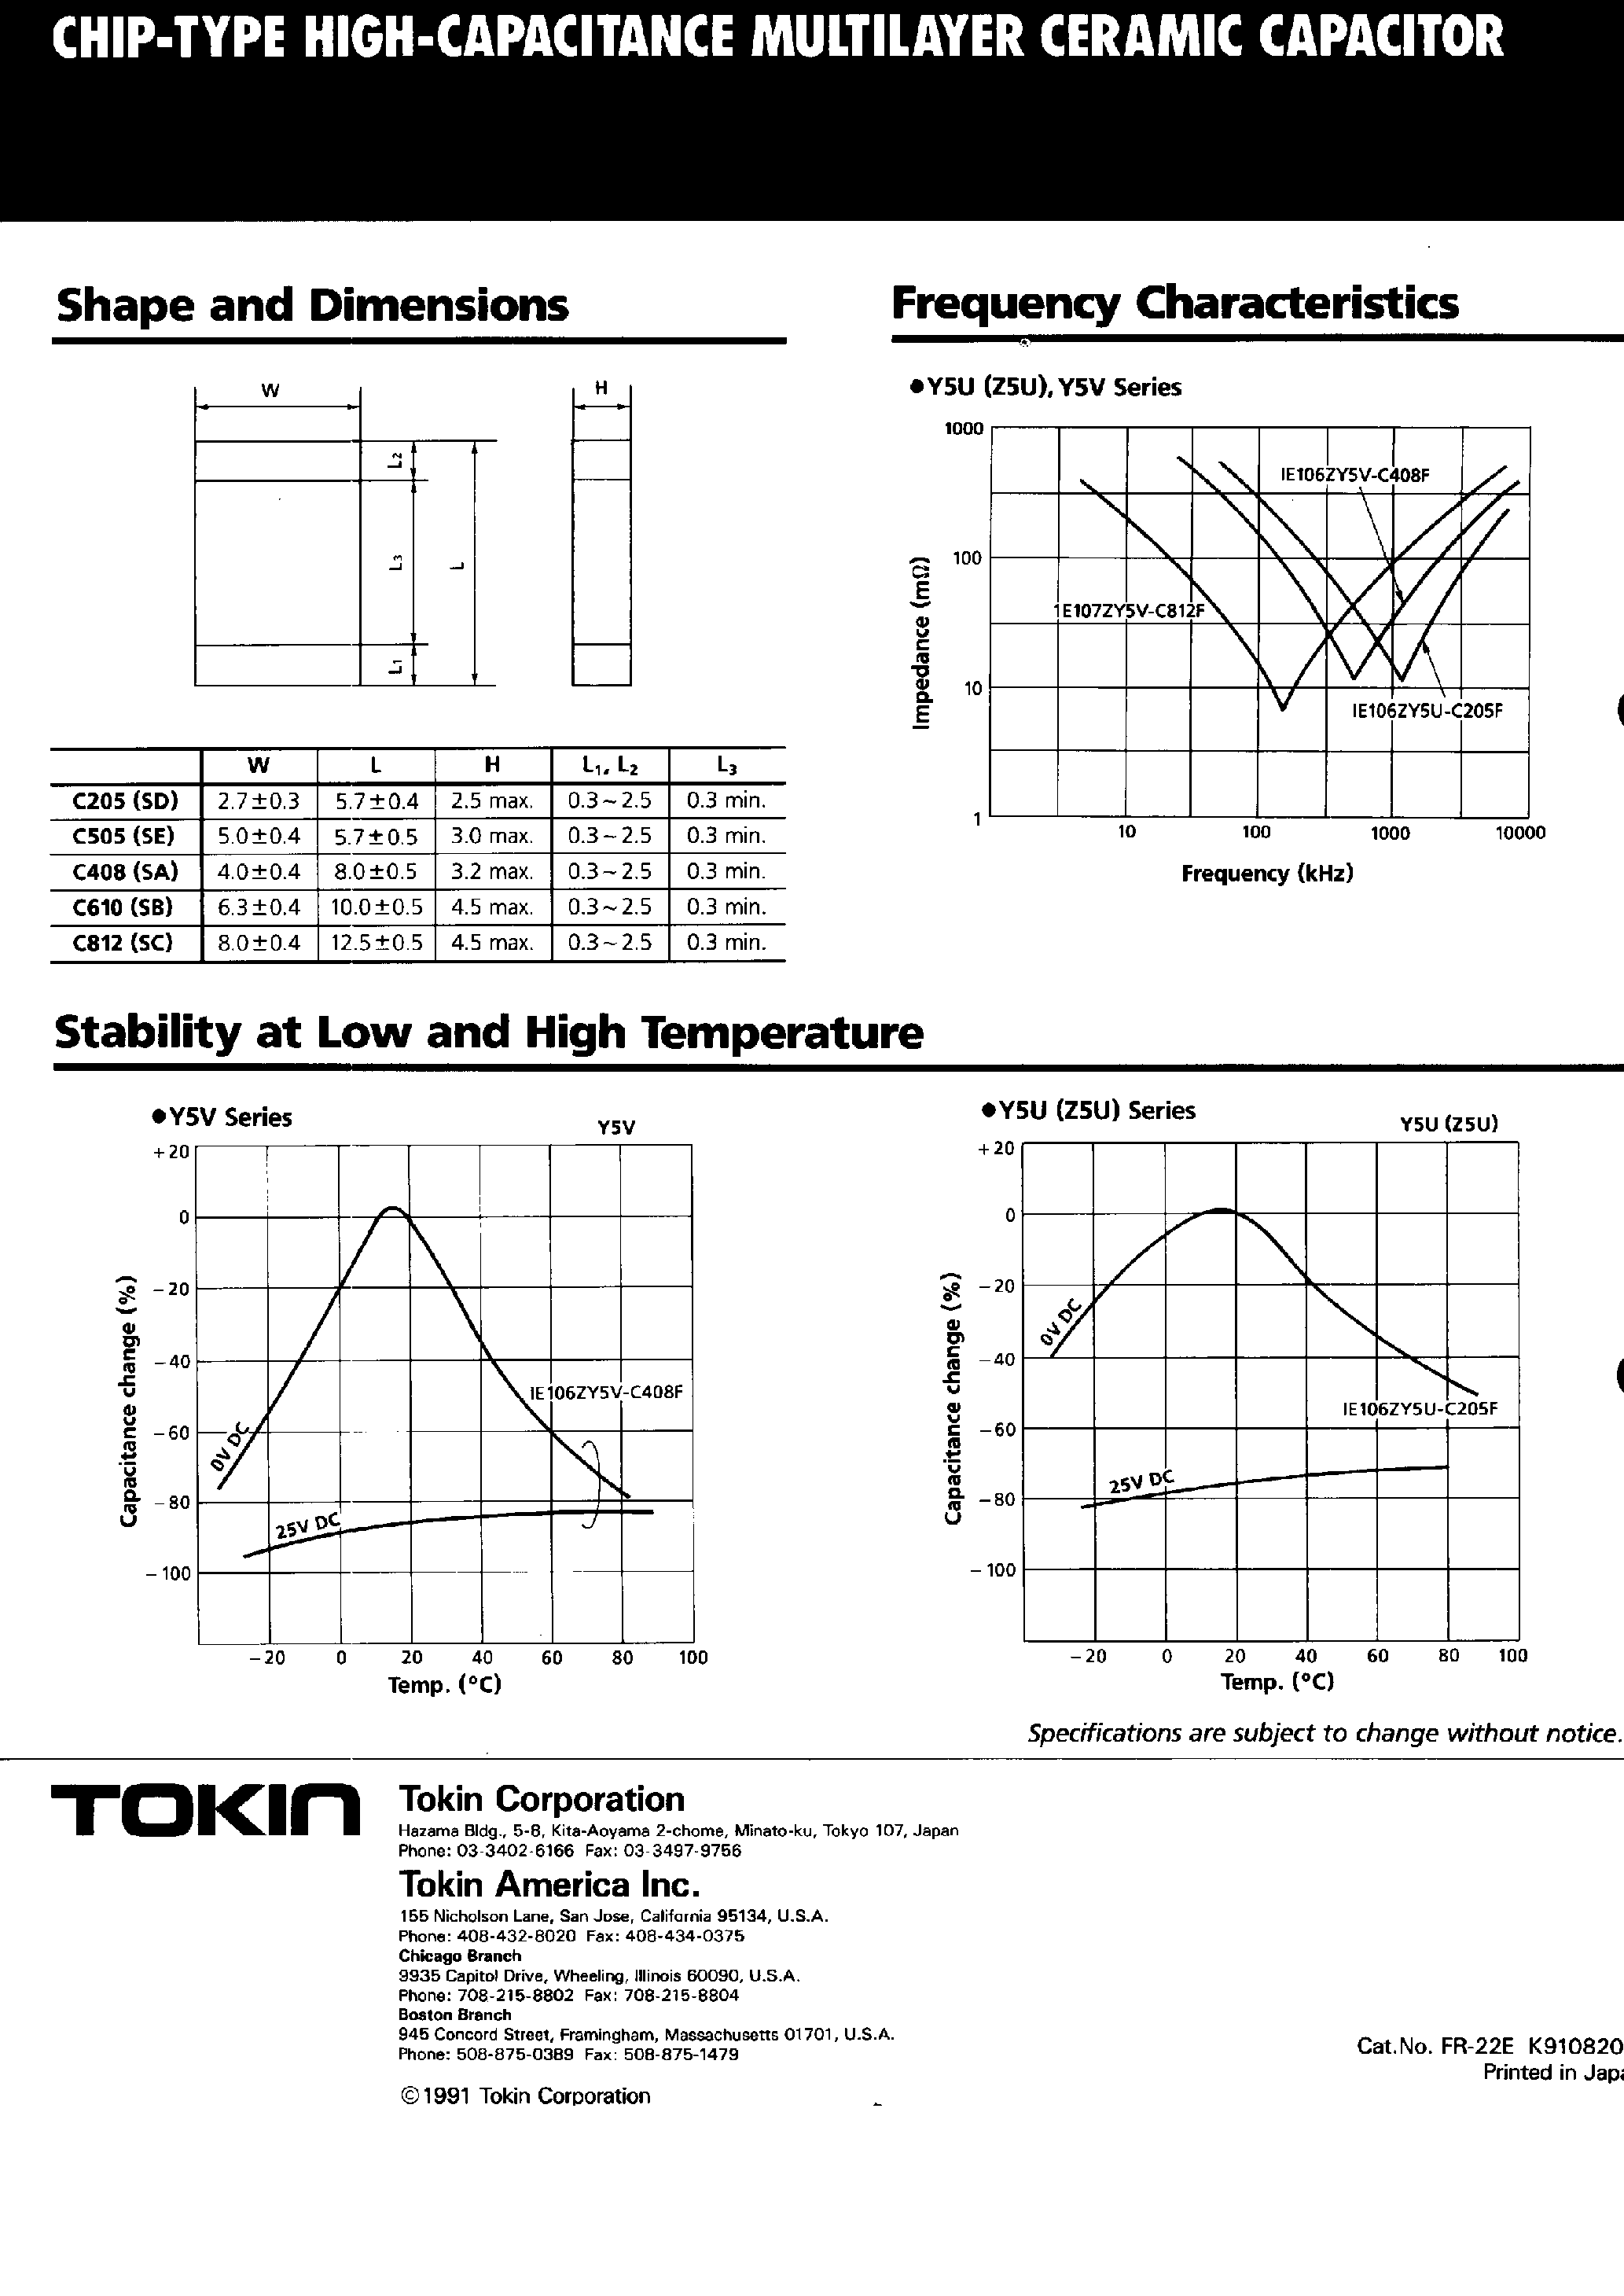 Datasheet 1N106ZY5U-Cxxx - Chip Type High Capacitance Multilayer Ceramic Capacitor page 2